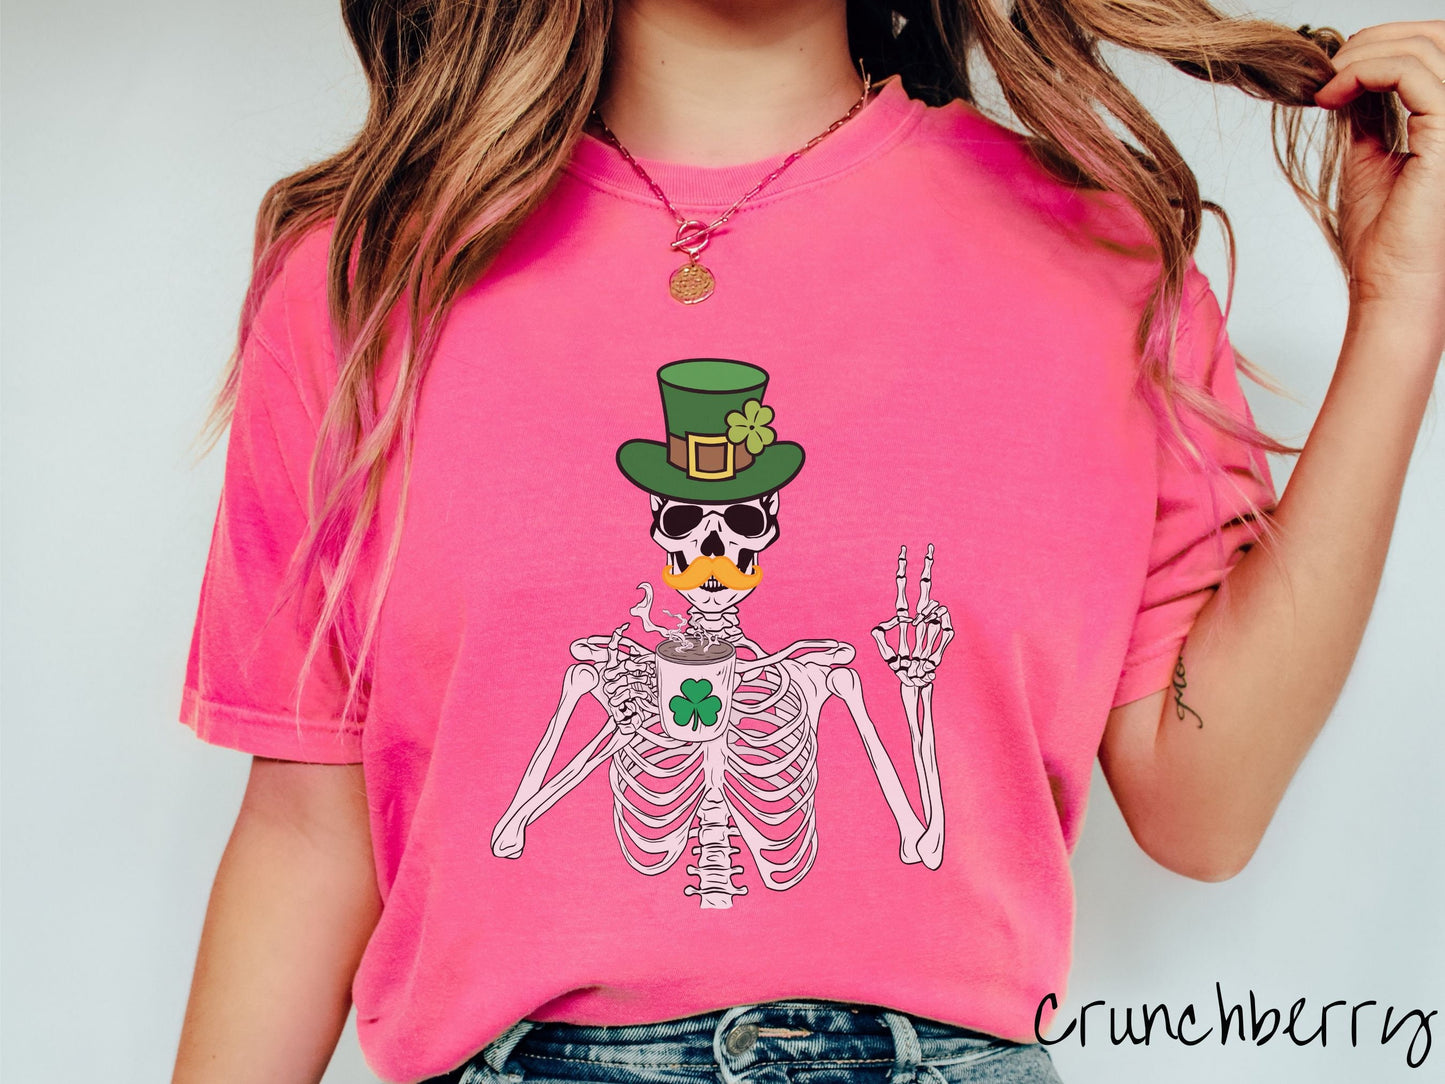 A woman wearing a vintage, crunchberry colored shirt with a skeleton wearing a green top hat and an orange mustache showing the peace sign with its left hand and drinking out of a steaming hot coffee cup with a three leaf clover on it.